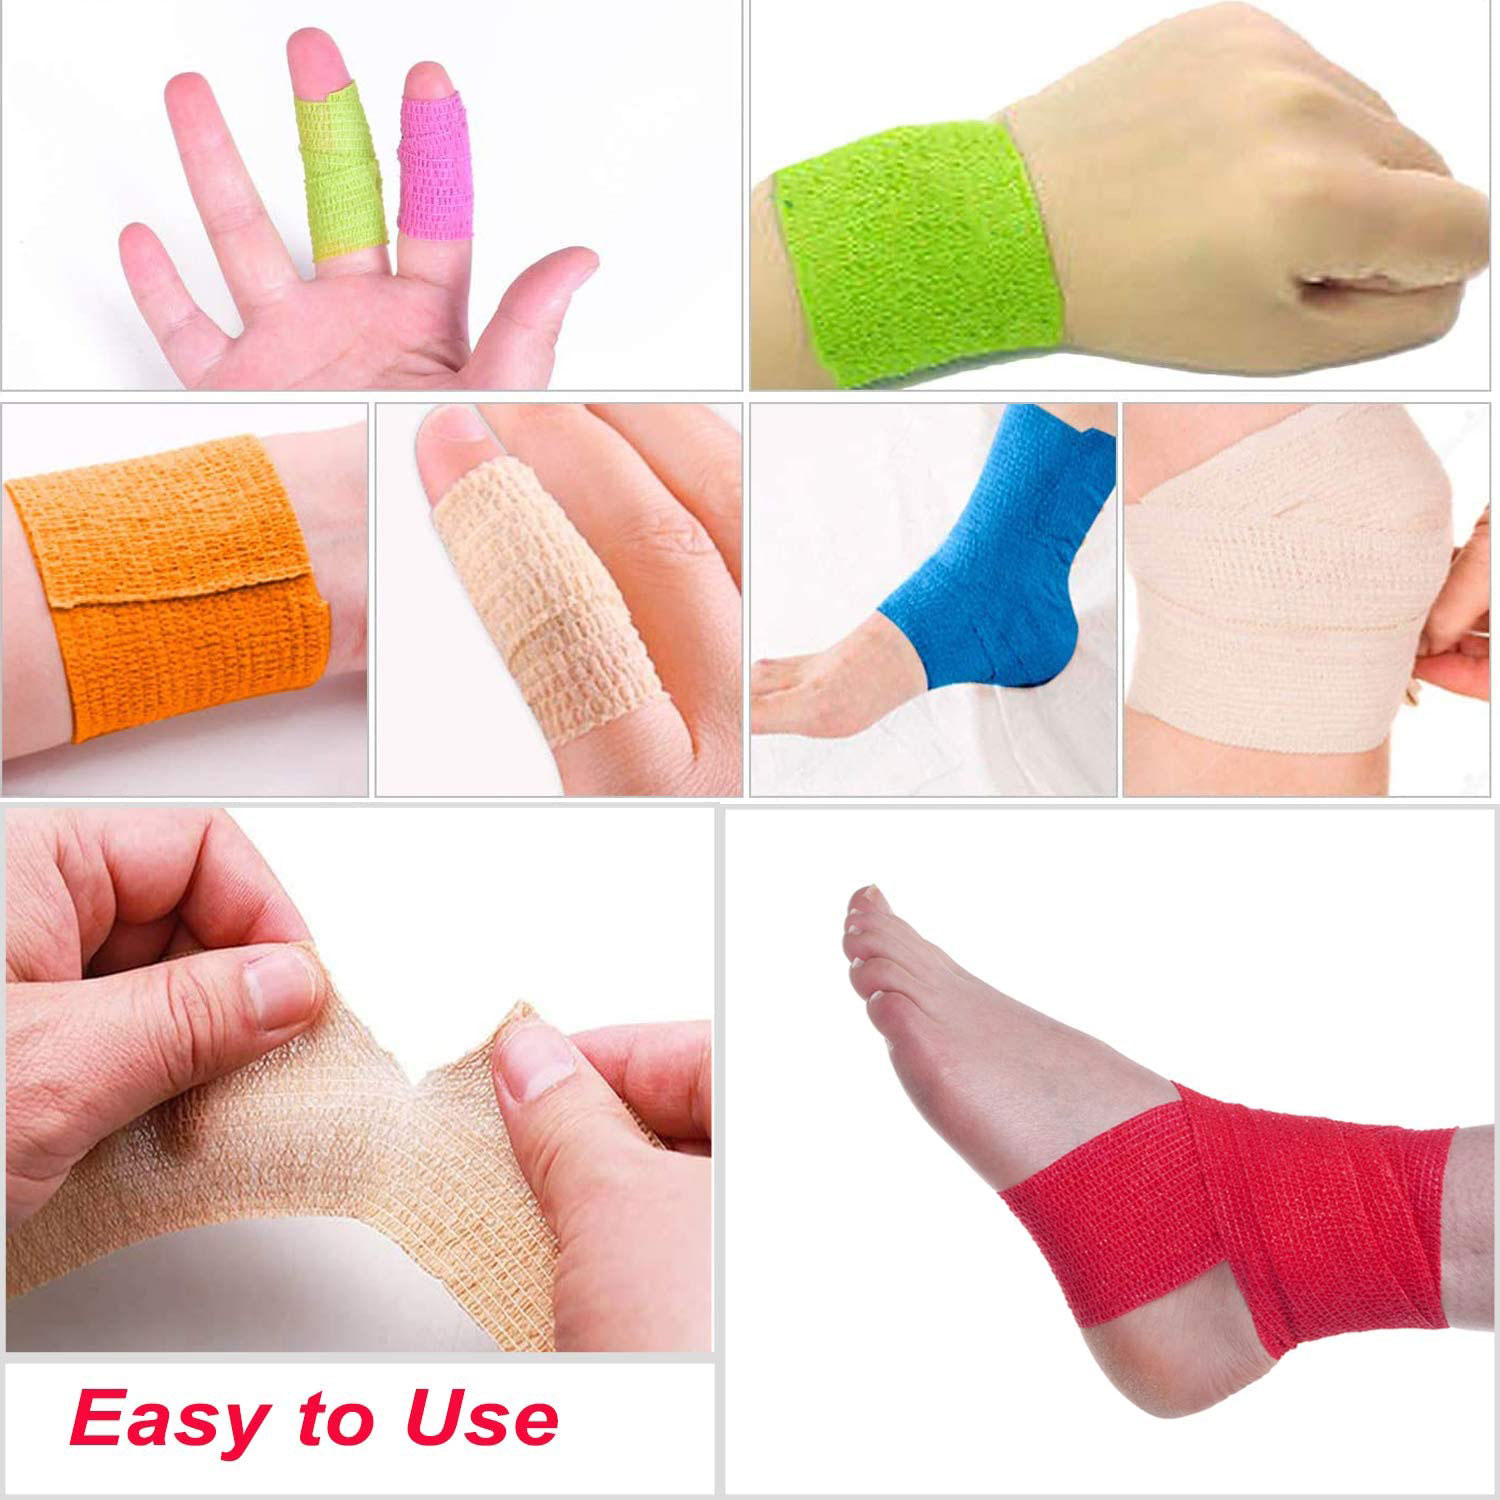 2”x 5 Yards Self Adhesive Bandage Wrap, Breathable Vet Wrap Cohesive Bandage First Aid for Pets, Athletic Elastic Self Adherent Wrap for Sports Injury: Wrist, Knee & Ankle Sprains（Rainbow）